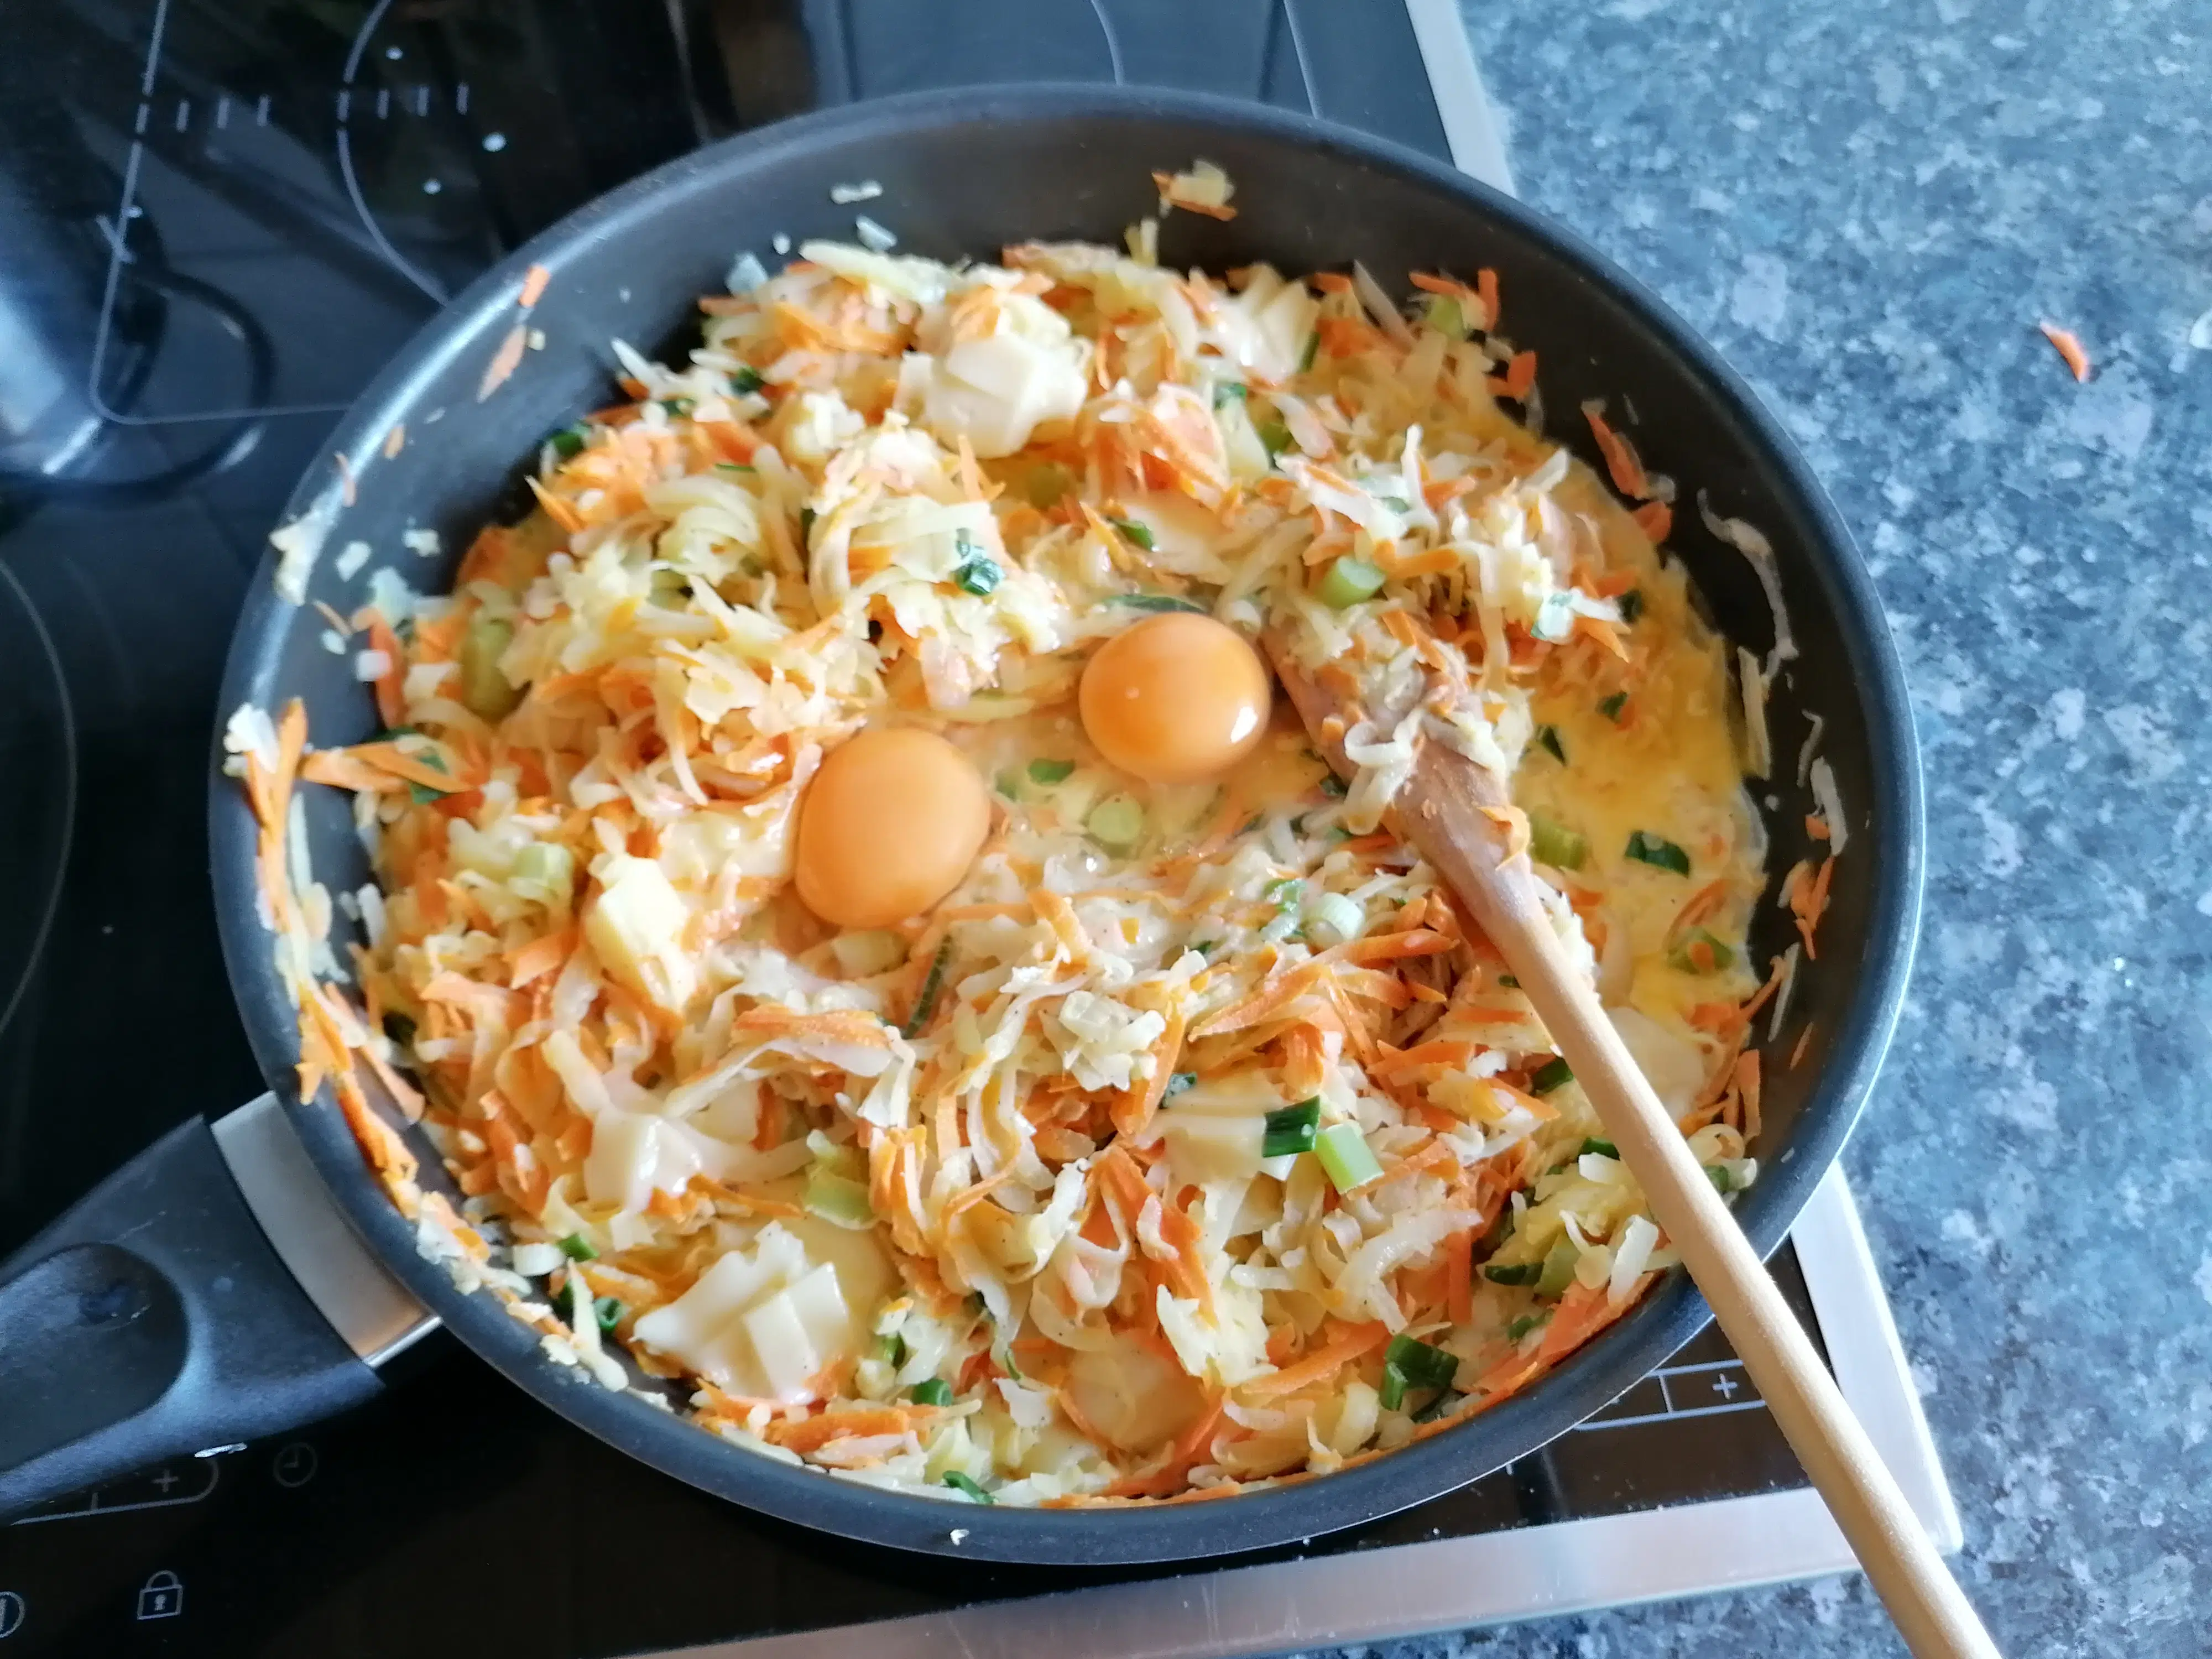 Cheesy and creamy sauce for kohlrabi quiche in the making. Eggs are added to the pan with whipped cream, cheese, kohlrabi, spring onions and carrots mixture. 